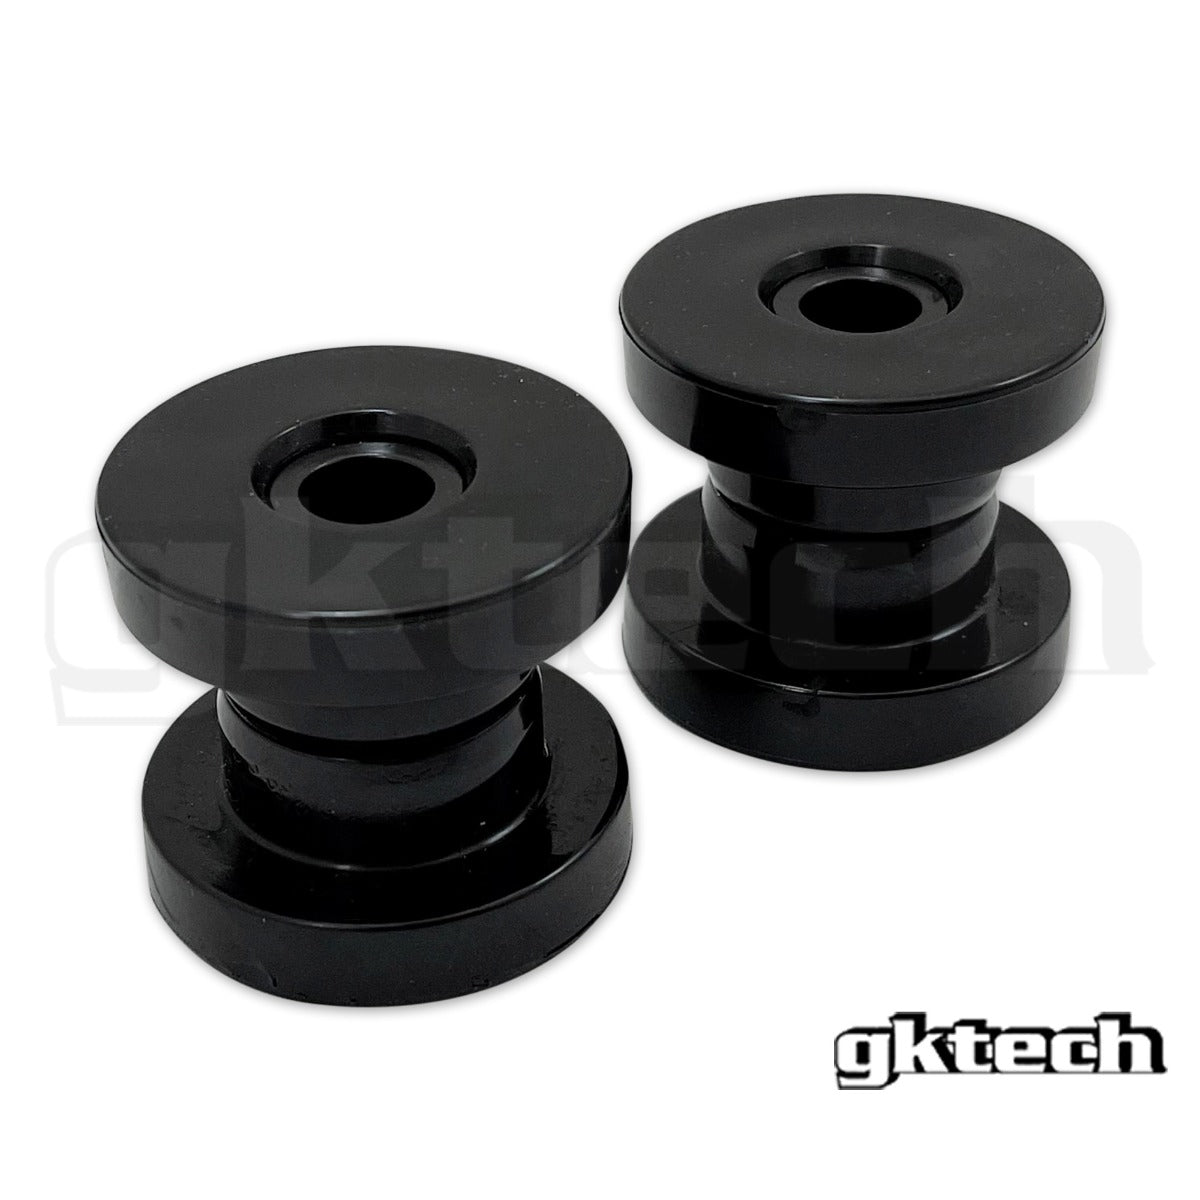 240sx/Skyline/300zx chassis Polyurethane Differential Bushings